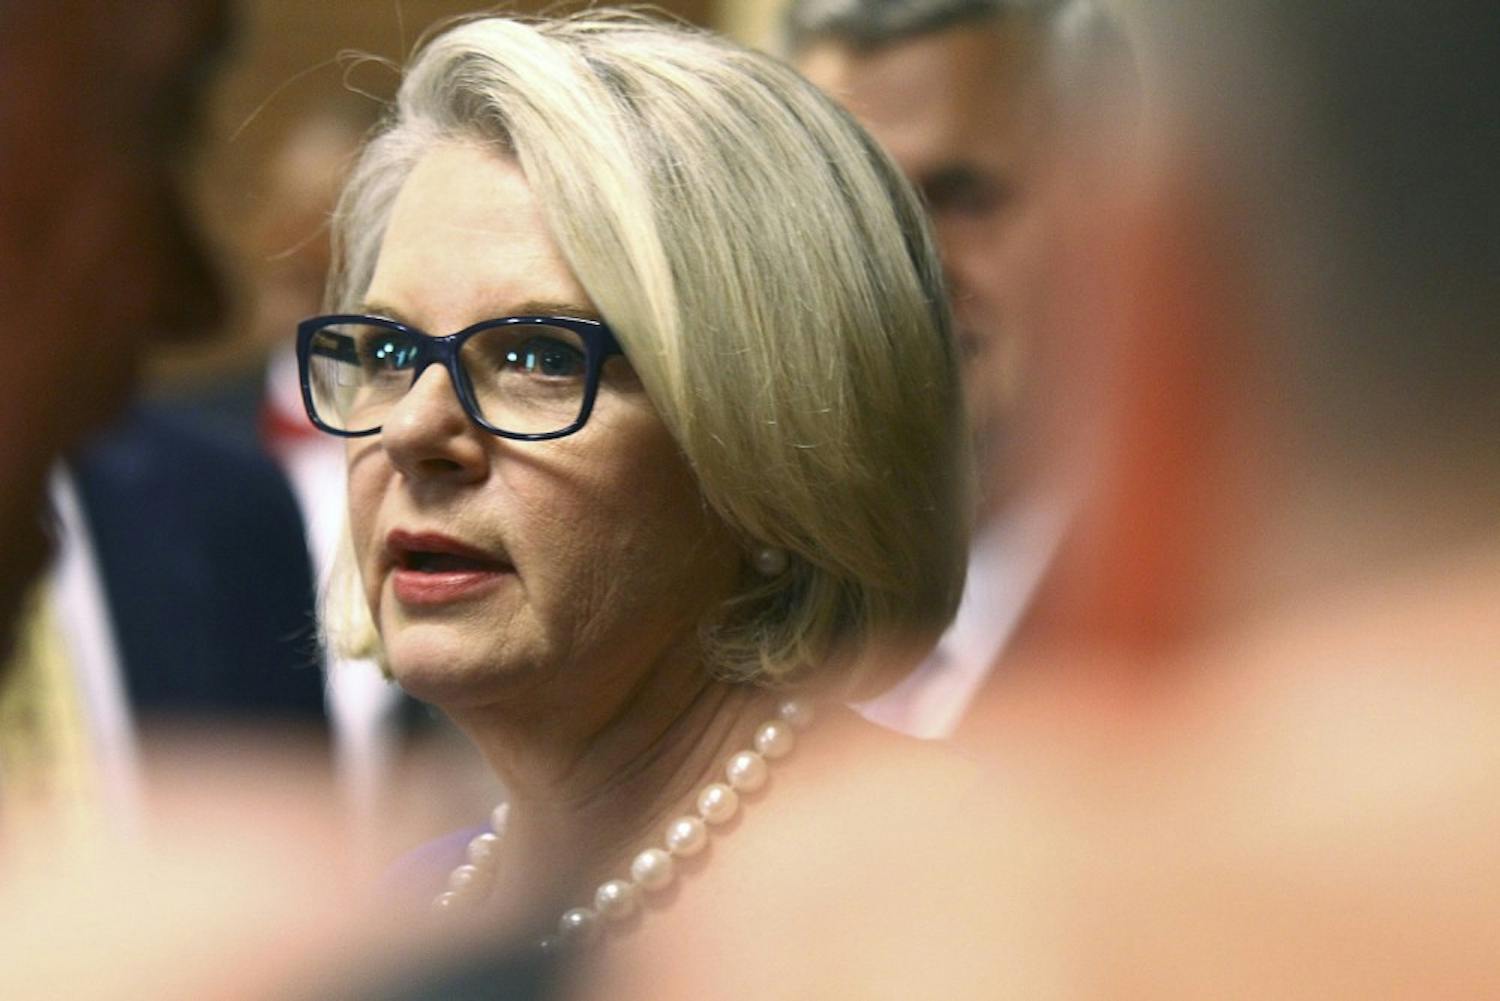 UNC-system president Margaret Spellings may leave the system soon, according to multiple sources.